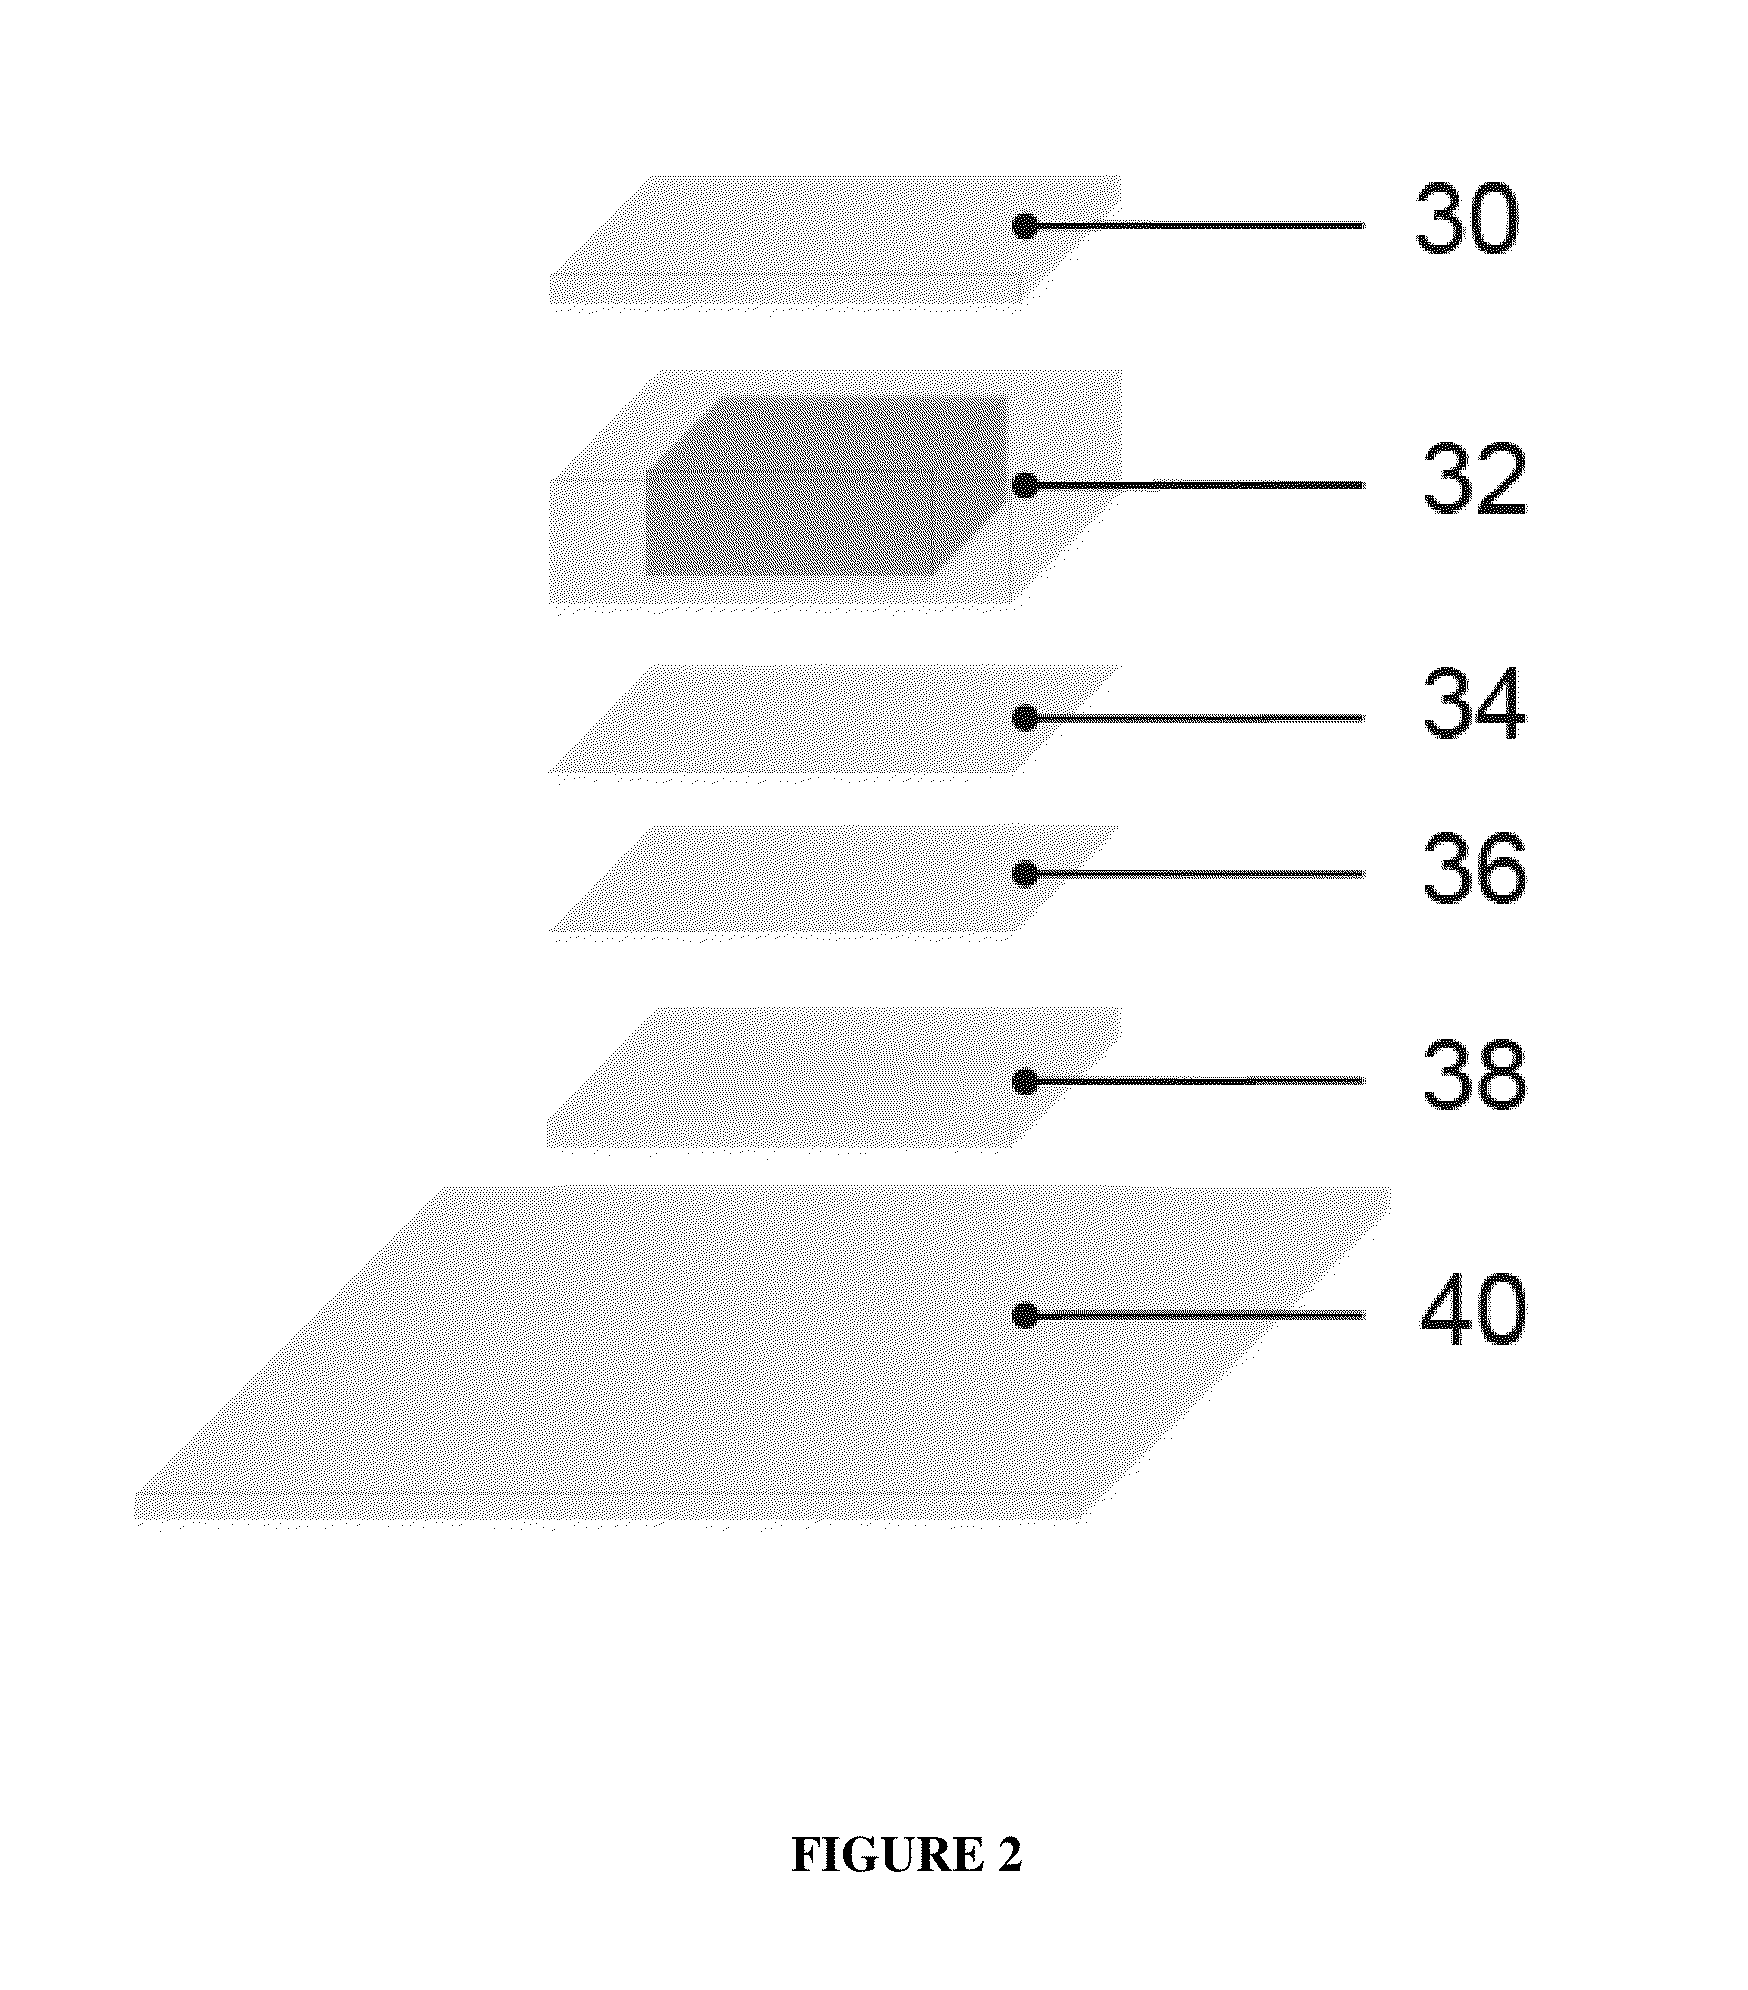 System and method for microfluidic cell culture